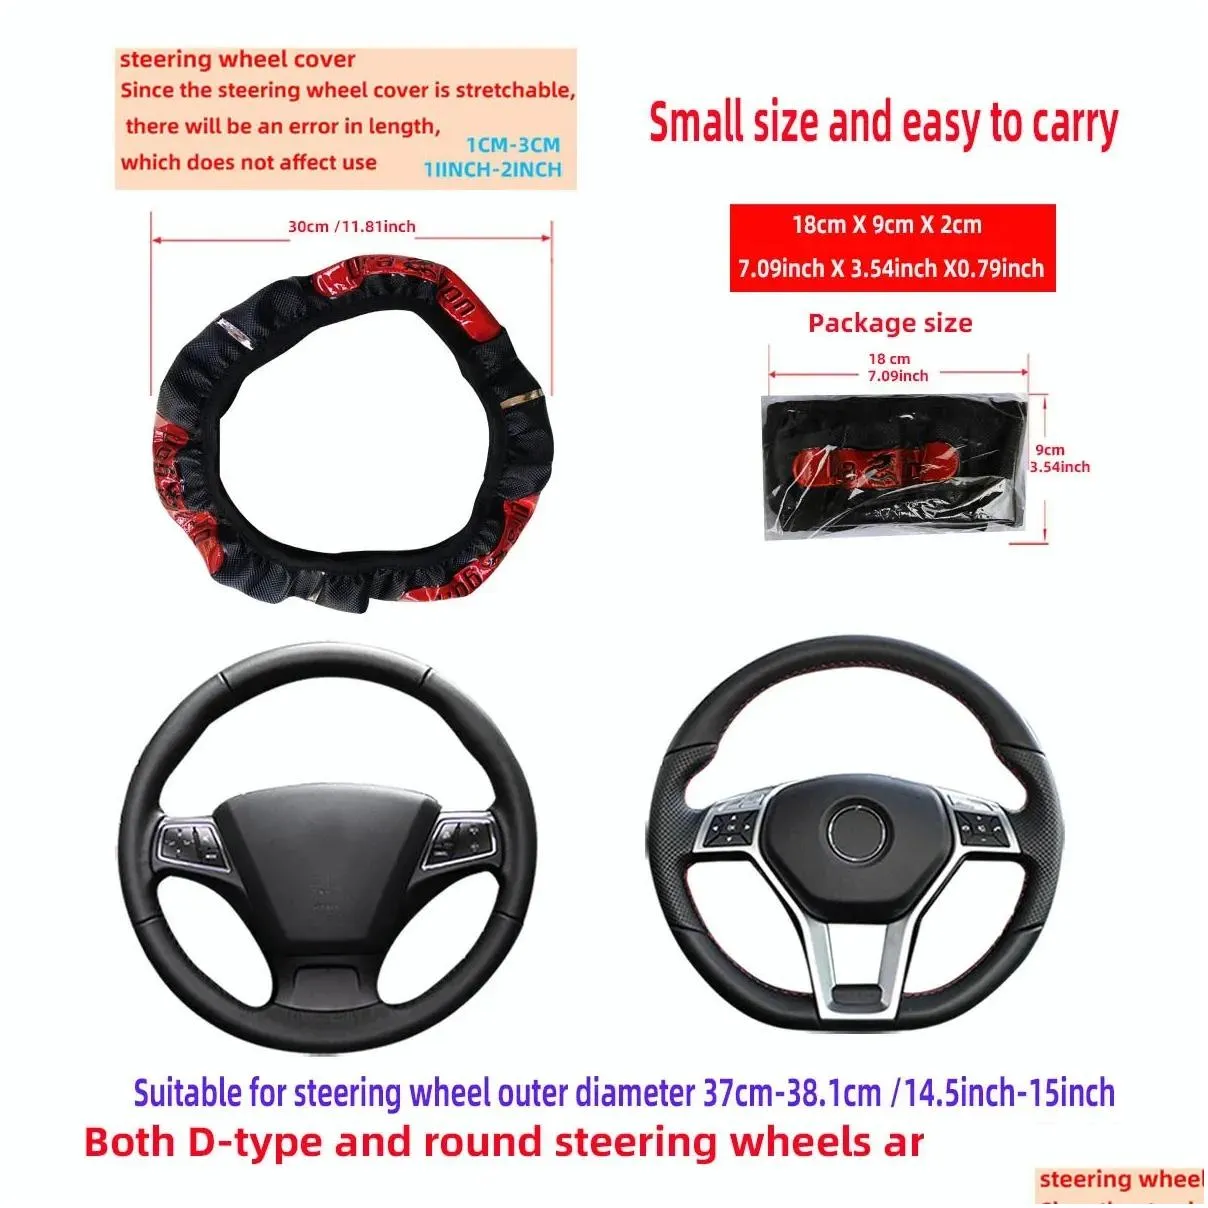 Car Steering Wheel Covers 100% Brand New Reflective Faux Leather Elastic China Dragon Design Auto Steering Wheel Protector